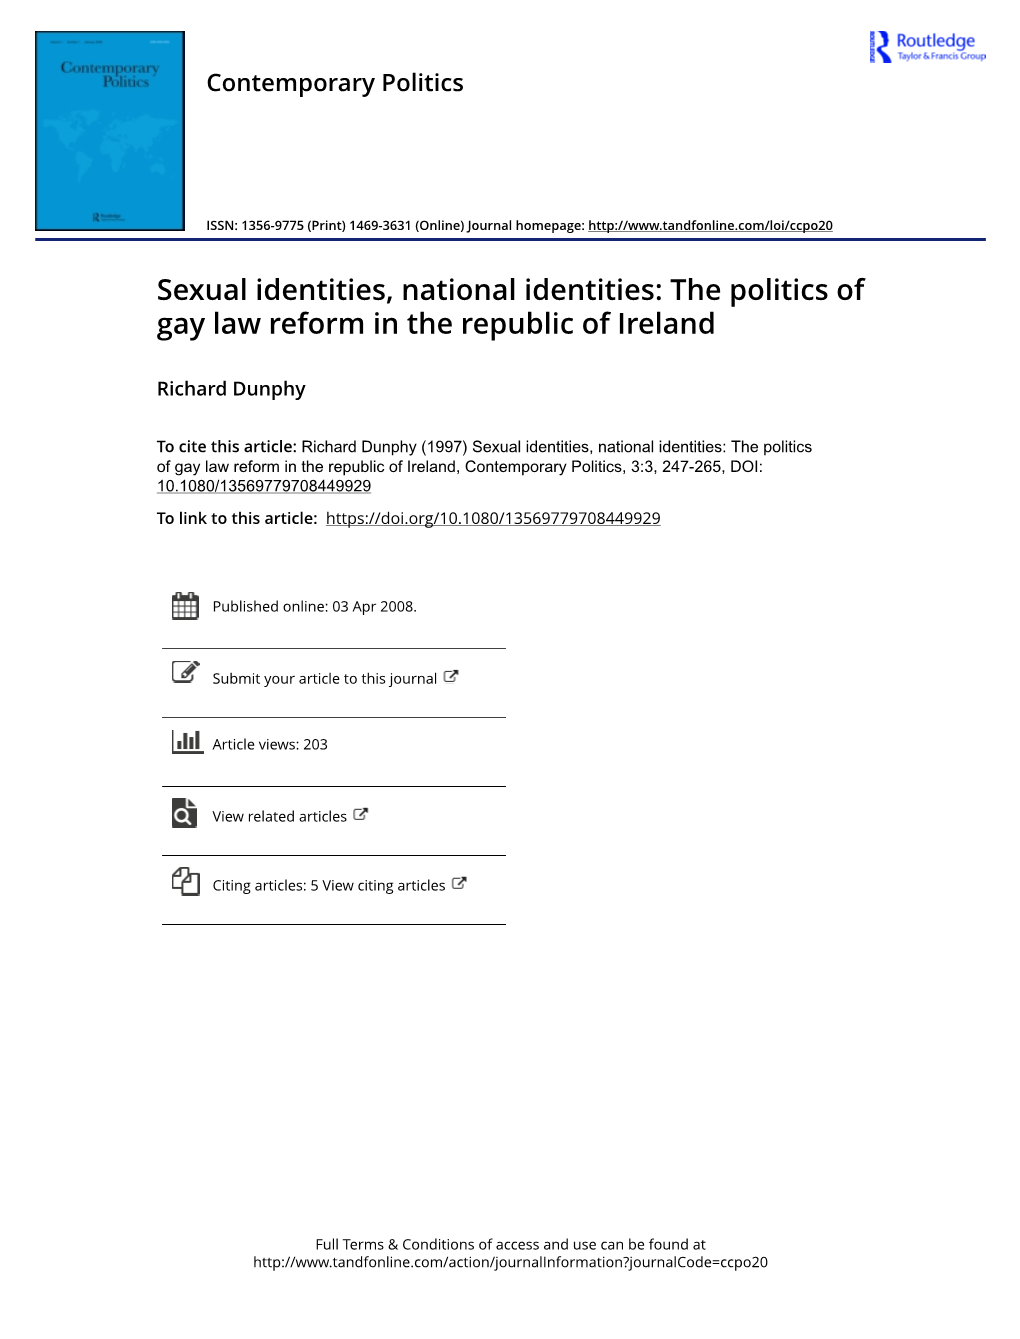 Sexual Identities, National Identities: the Politics of Gay Law Reform in the Republic of Ireland